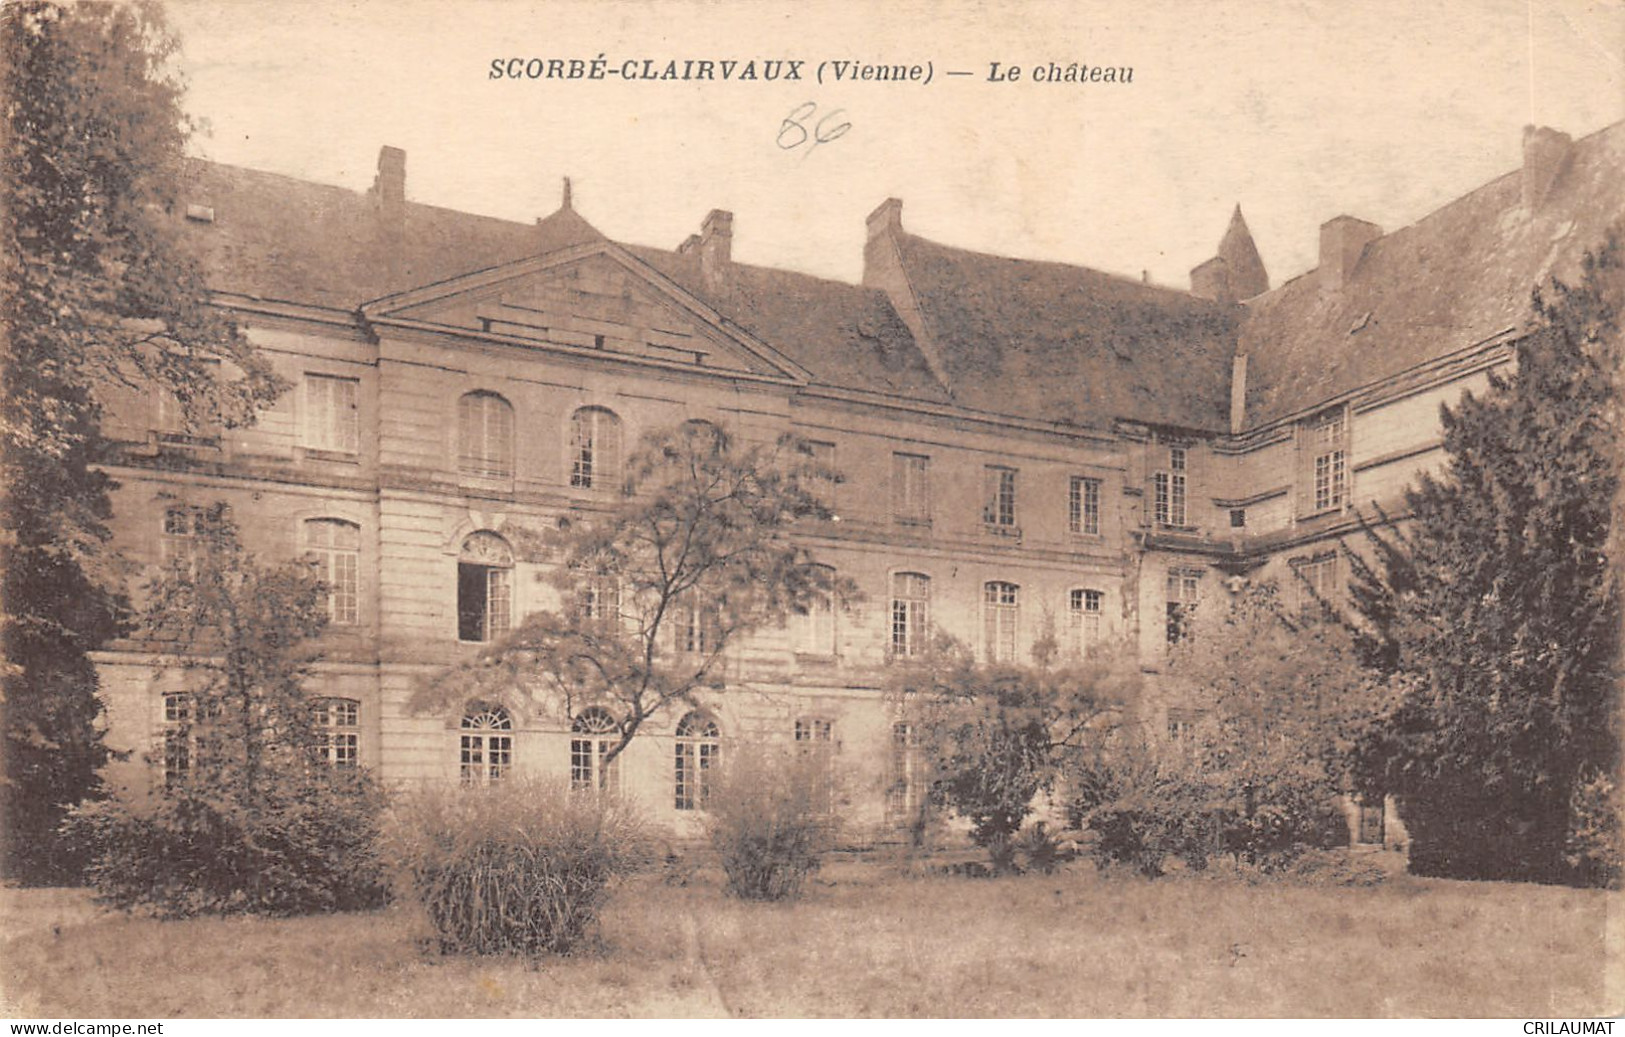 86-SCORBE CLAIRVAUX-LE CHATEAU-N 6012-A/0195 - Scorbe Clairvaux